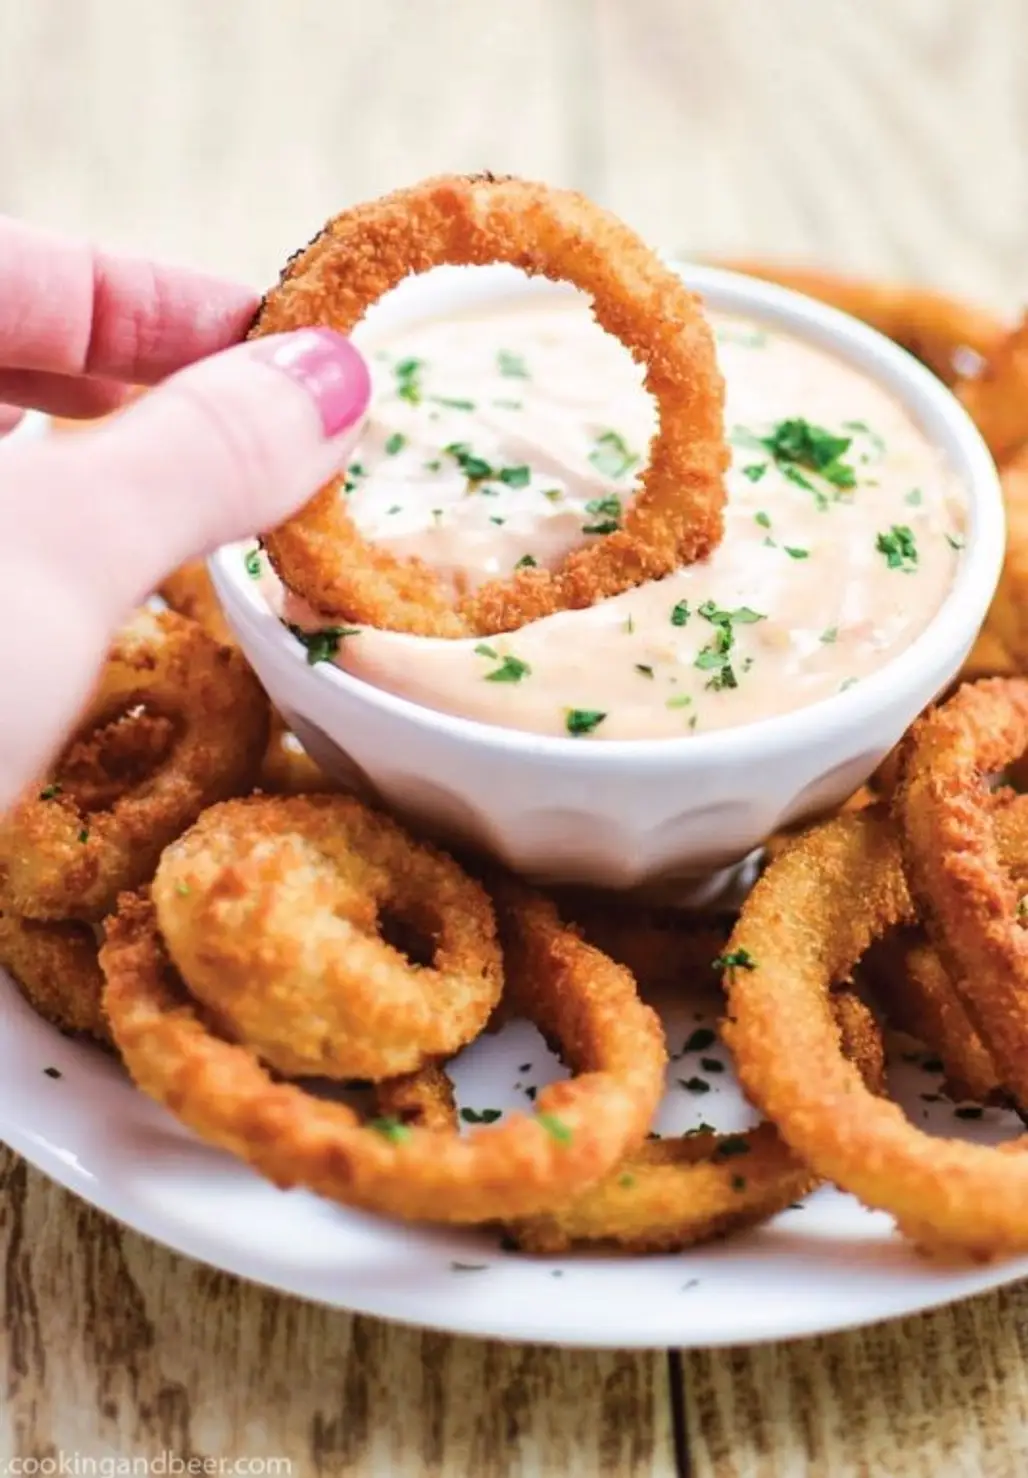 Spicy Chipotle Fry Sauce with Onion Rings